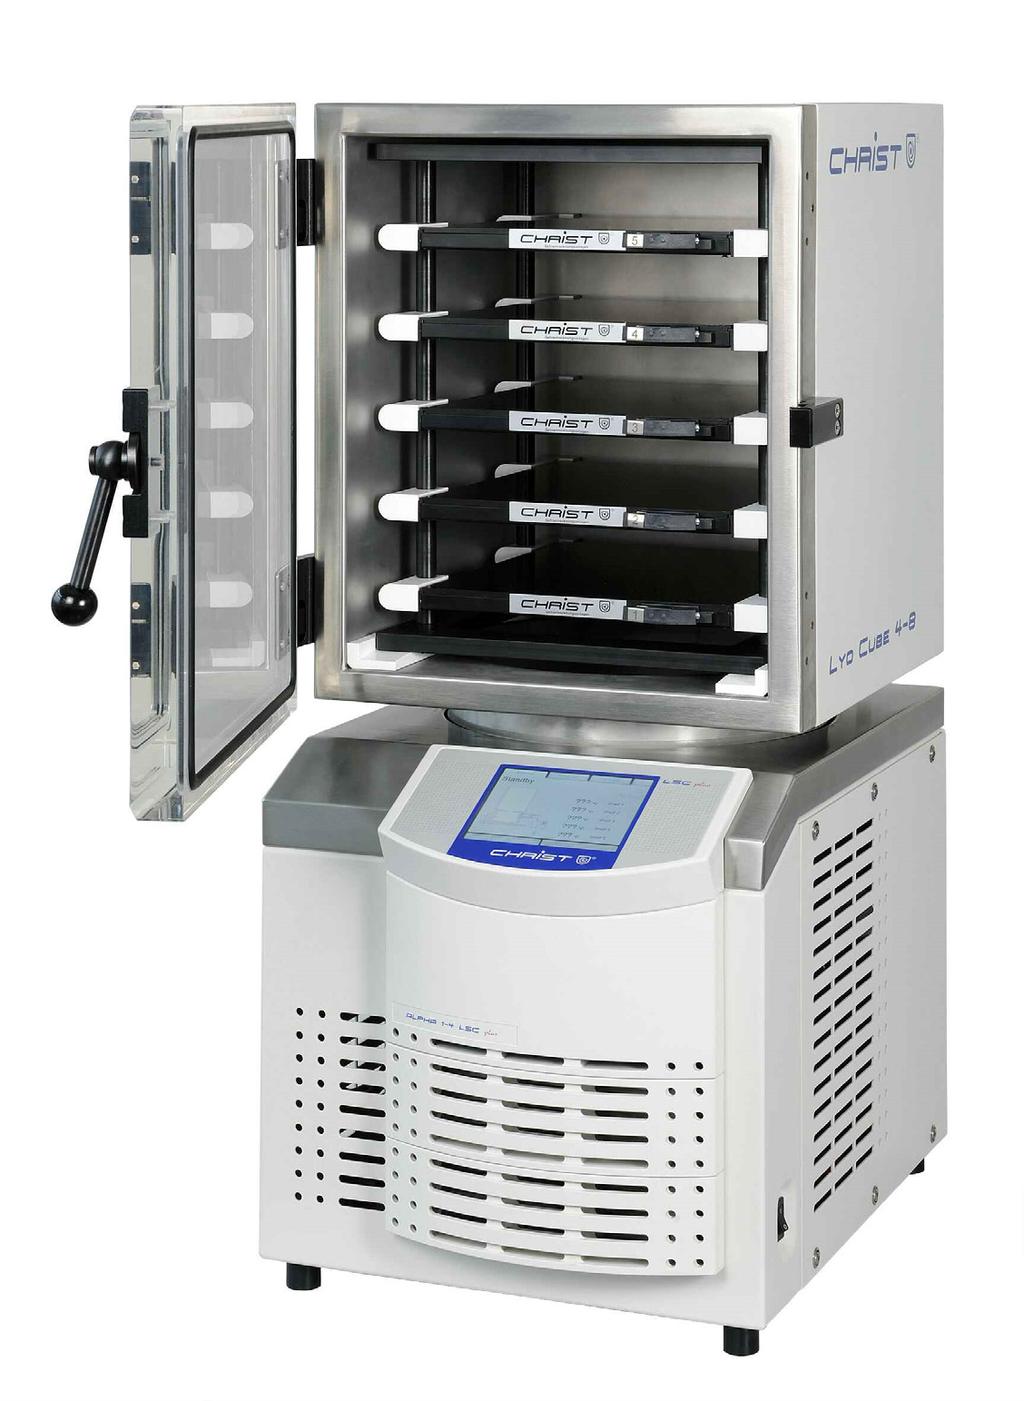 LyoCube 4-8 Fast front loading chamber avoids sample melting Configuration option compatible with